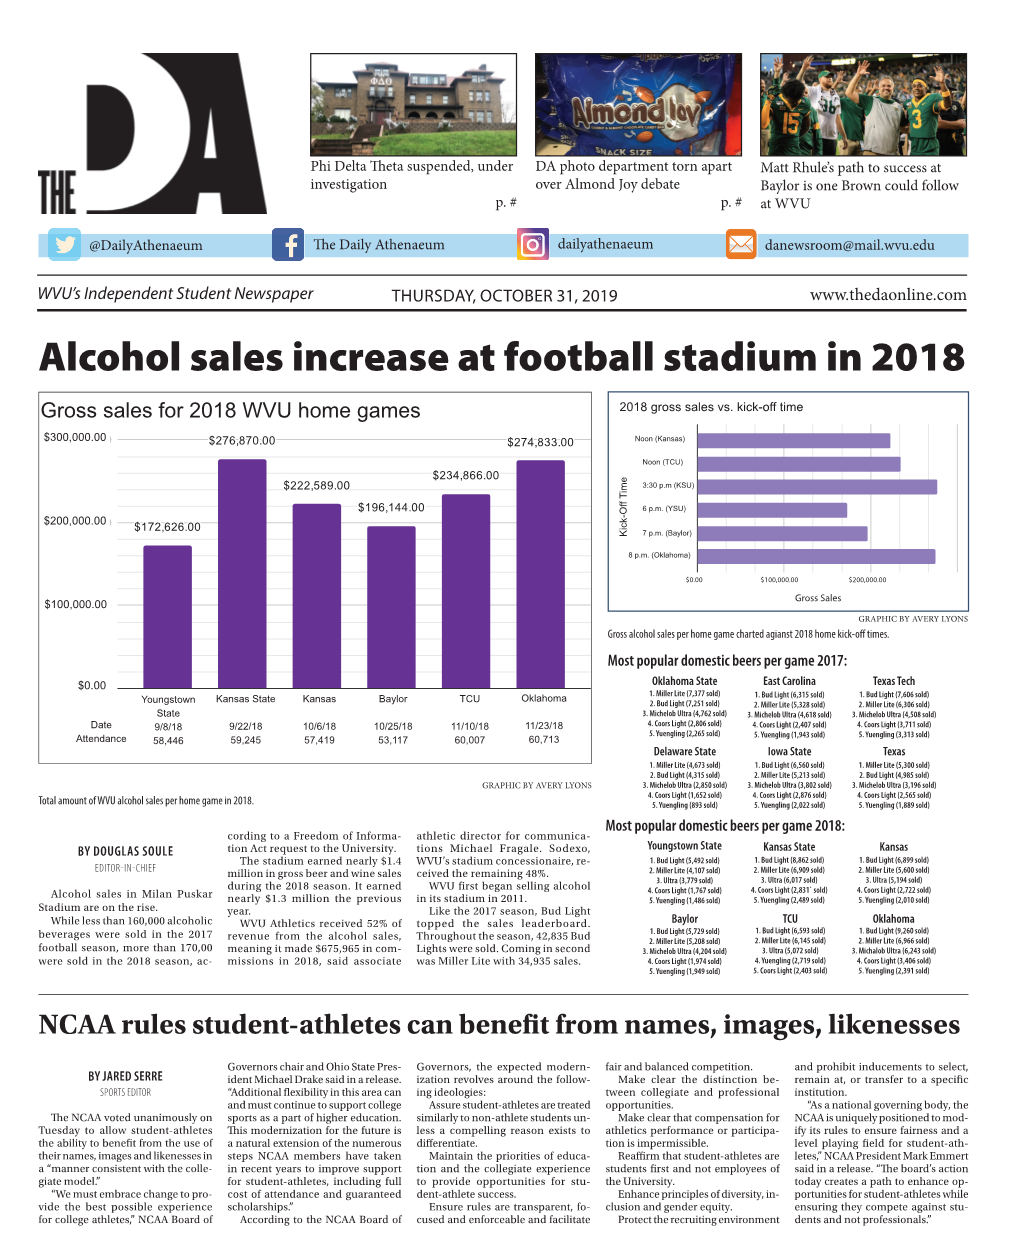 Alcohol Sales Increase at Football Stadium in 2018